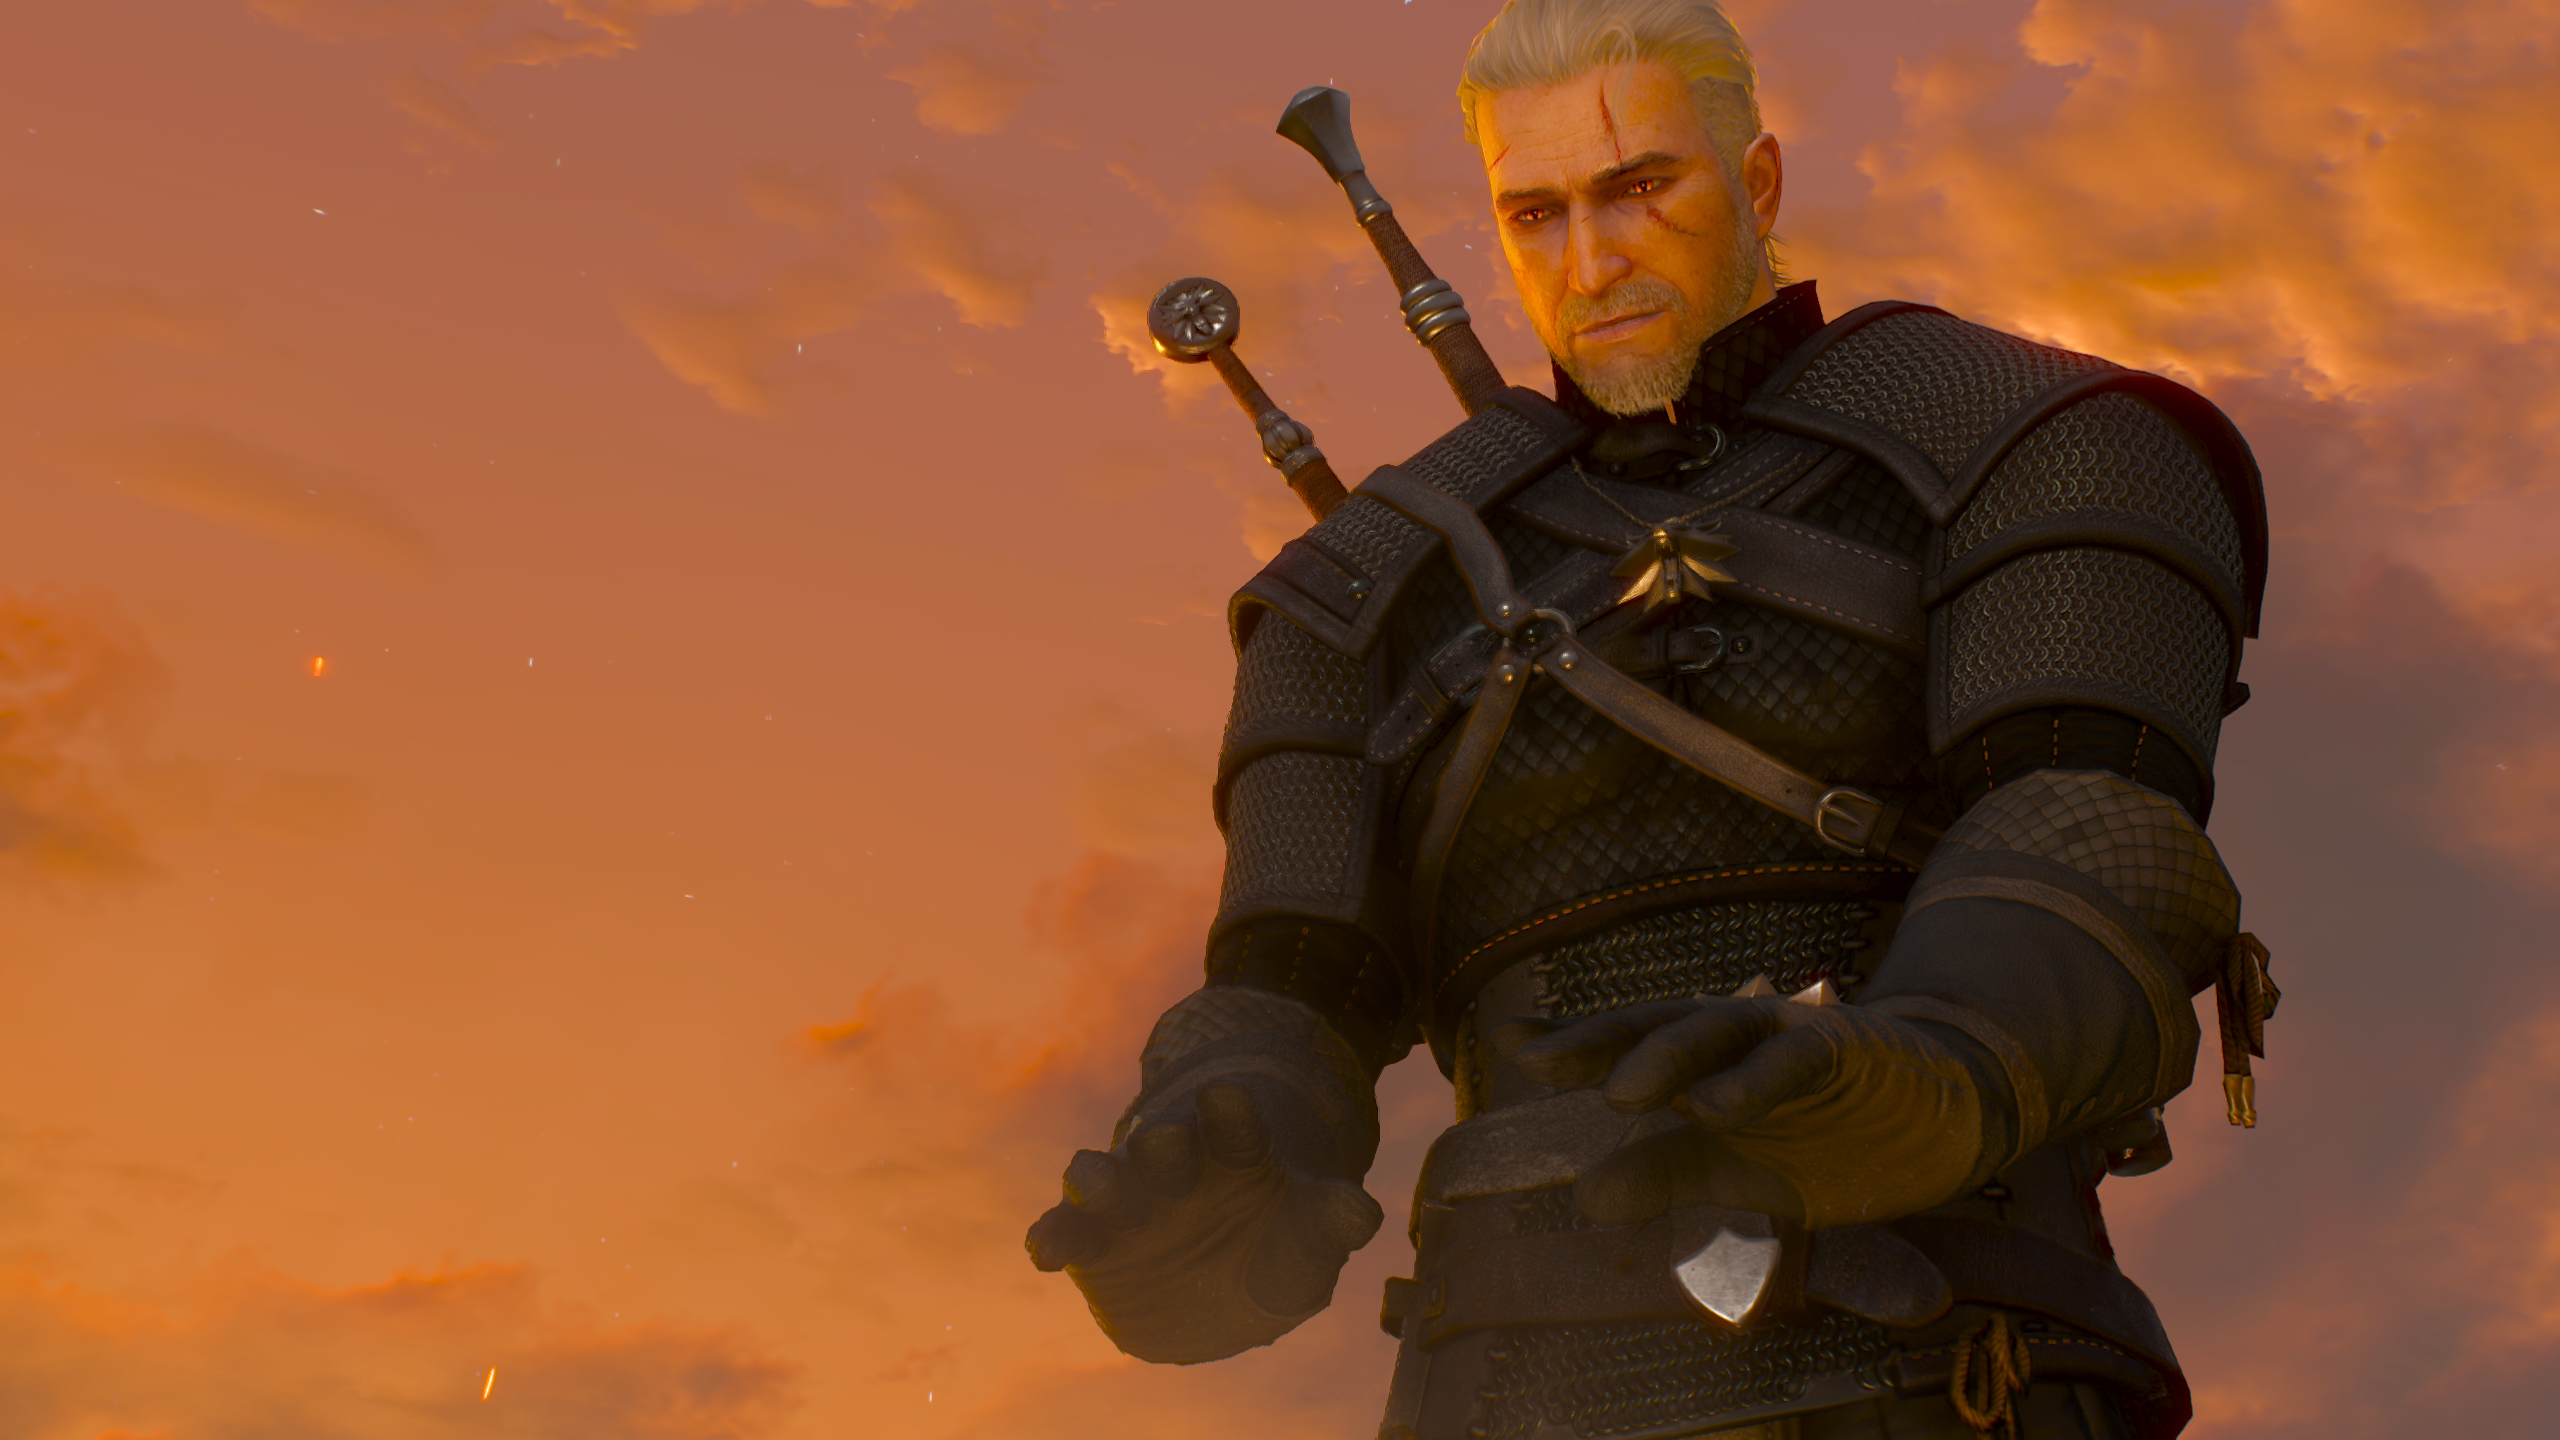 General 2560x1440 The Witcher 3: Wild Hunt The Witcher Geralt of Rivia video games video game characters book characters CD Projekt RED